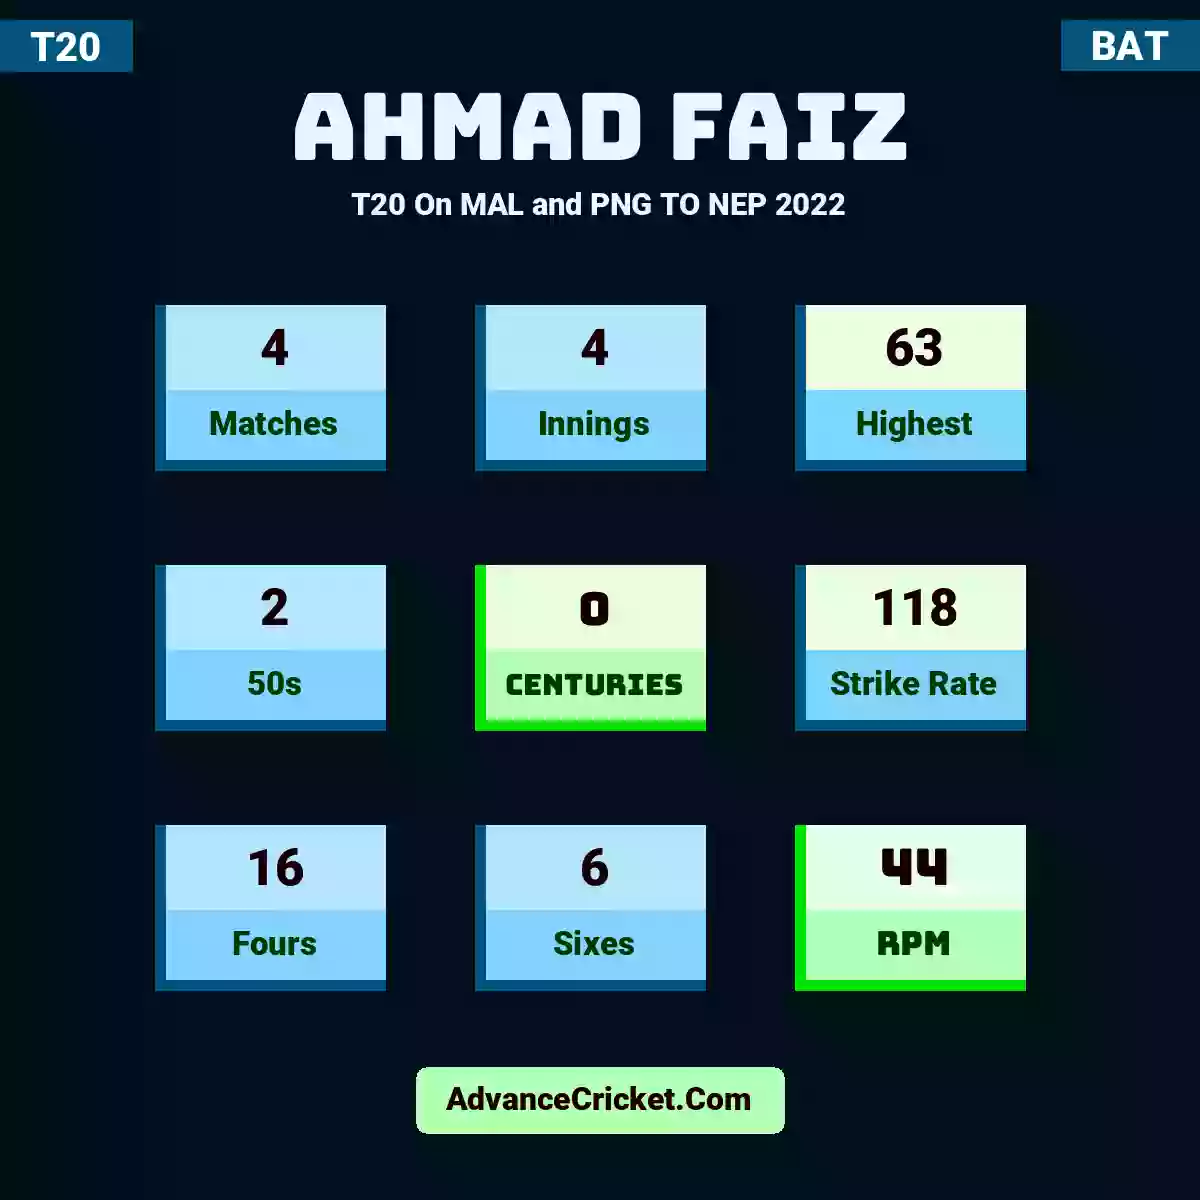 Ahmad Faiz T20  On MAL and PNG TO NEP 2022, Ahmad Faiz played 4 matches, scored 63 runs as highest, 2 half-centuries, and 0 centuries, with a strike rate of 118. A.Faiz hit 16 fours and 6 sixes, with an RPM of 44.